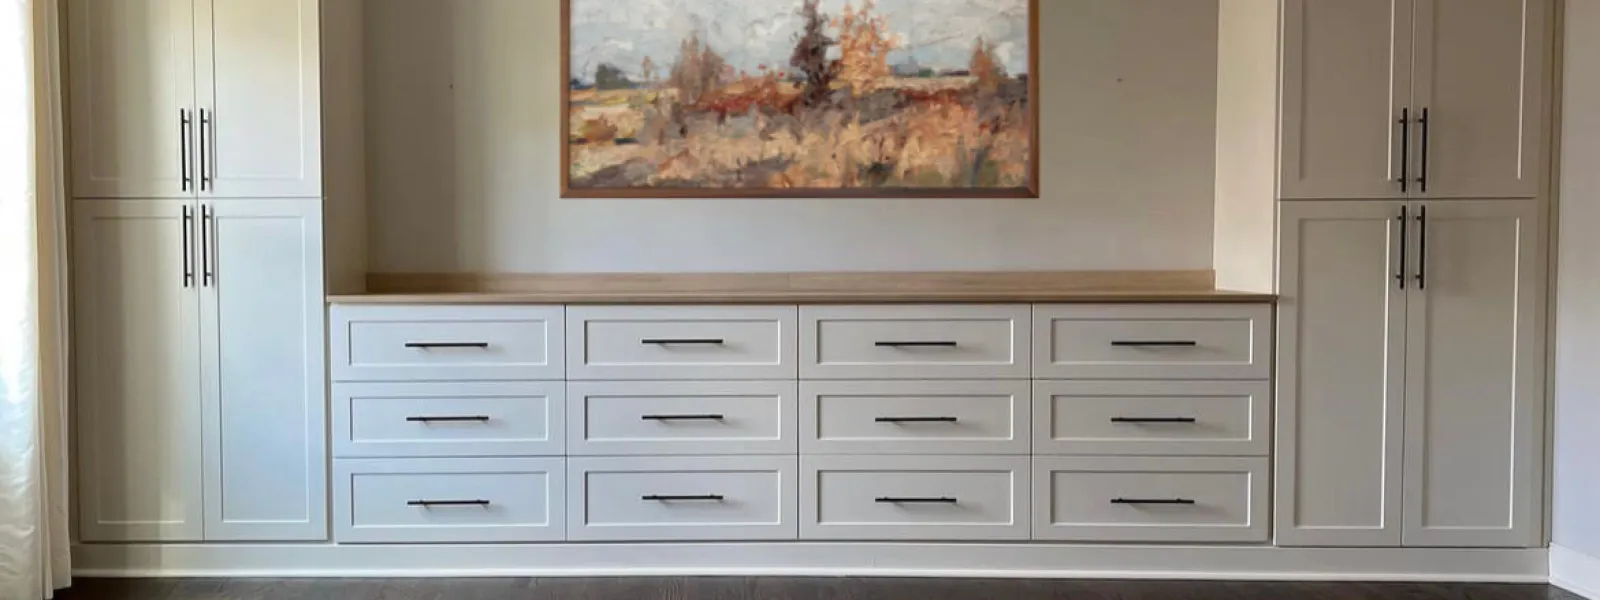 a room with white cabinets and a painting on the wall